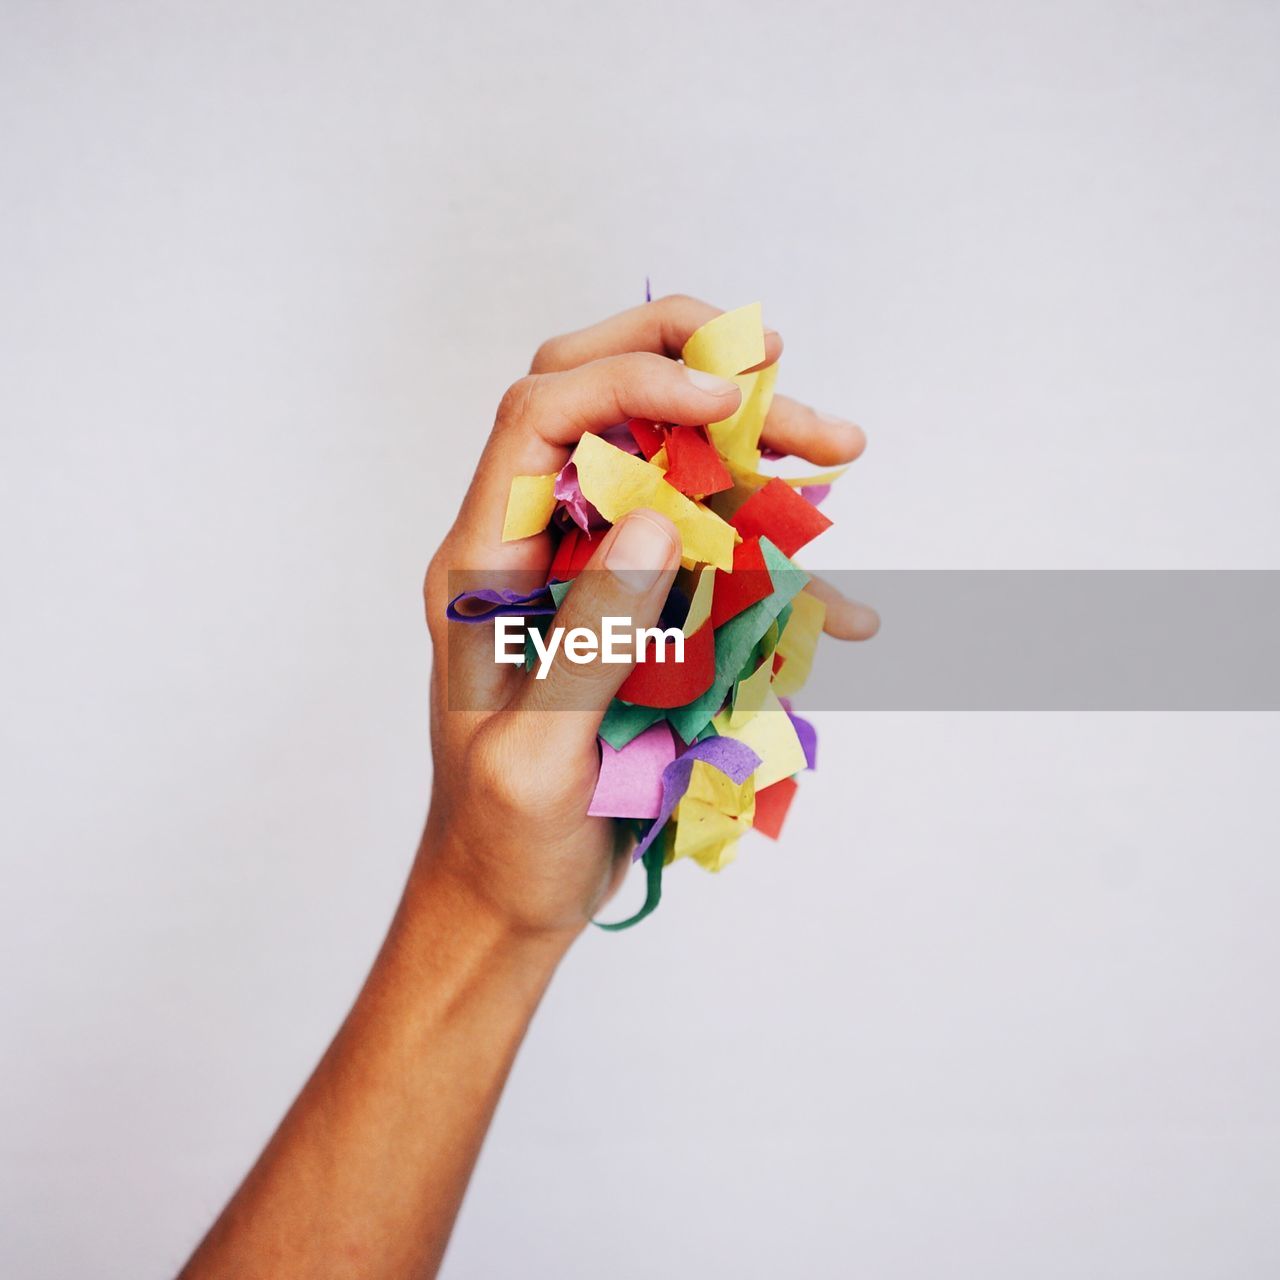 Cropped image of hand holding confetti against white background